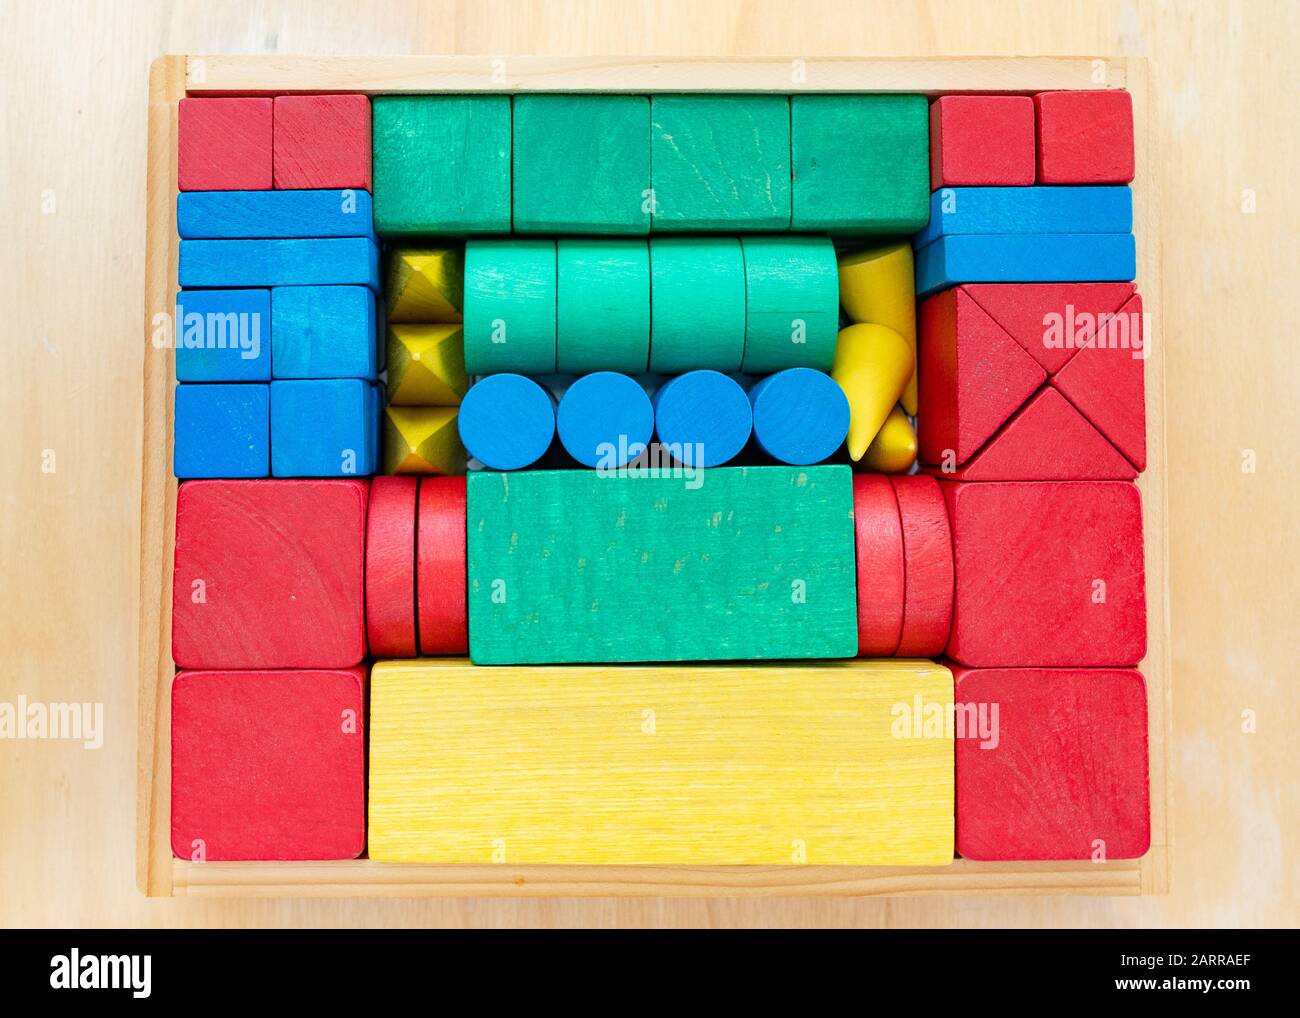 Poleidoblocs - mathematical learning aid invented by Dr Margaret Lowenfeld Stock Photo